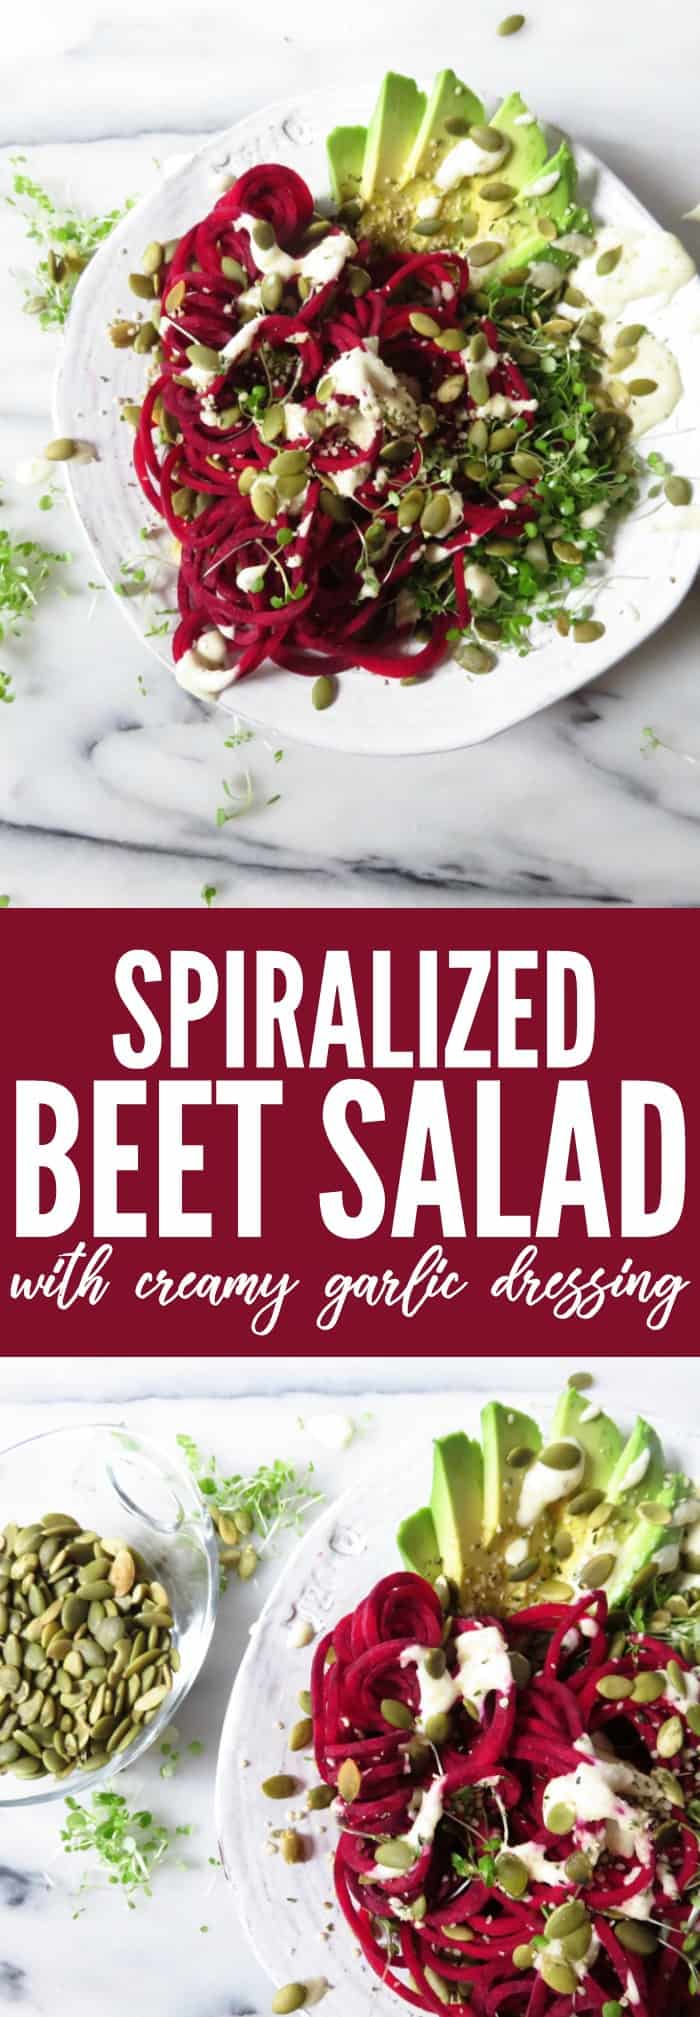 You'll love this recipe for raw Spiralized Beet Salad with vegan Creamy Garlic Dressing! I can't believe it's dairy free, it's so creamy and delicious!! thetoastedpinenut.com